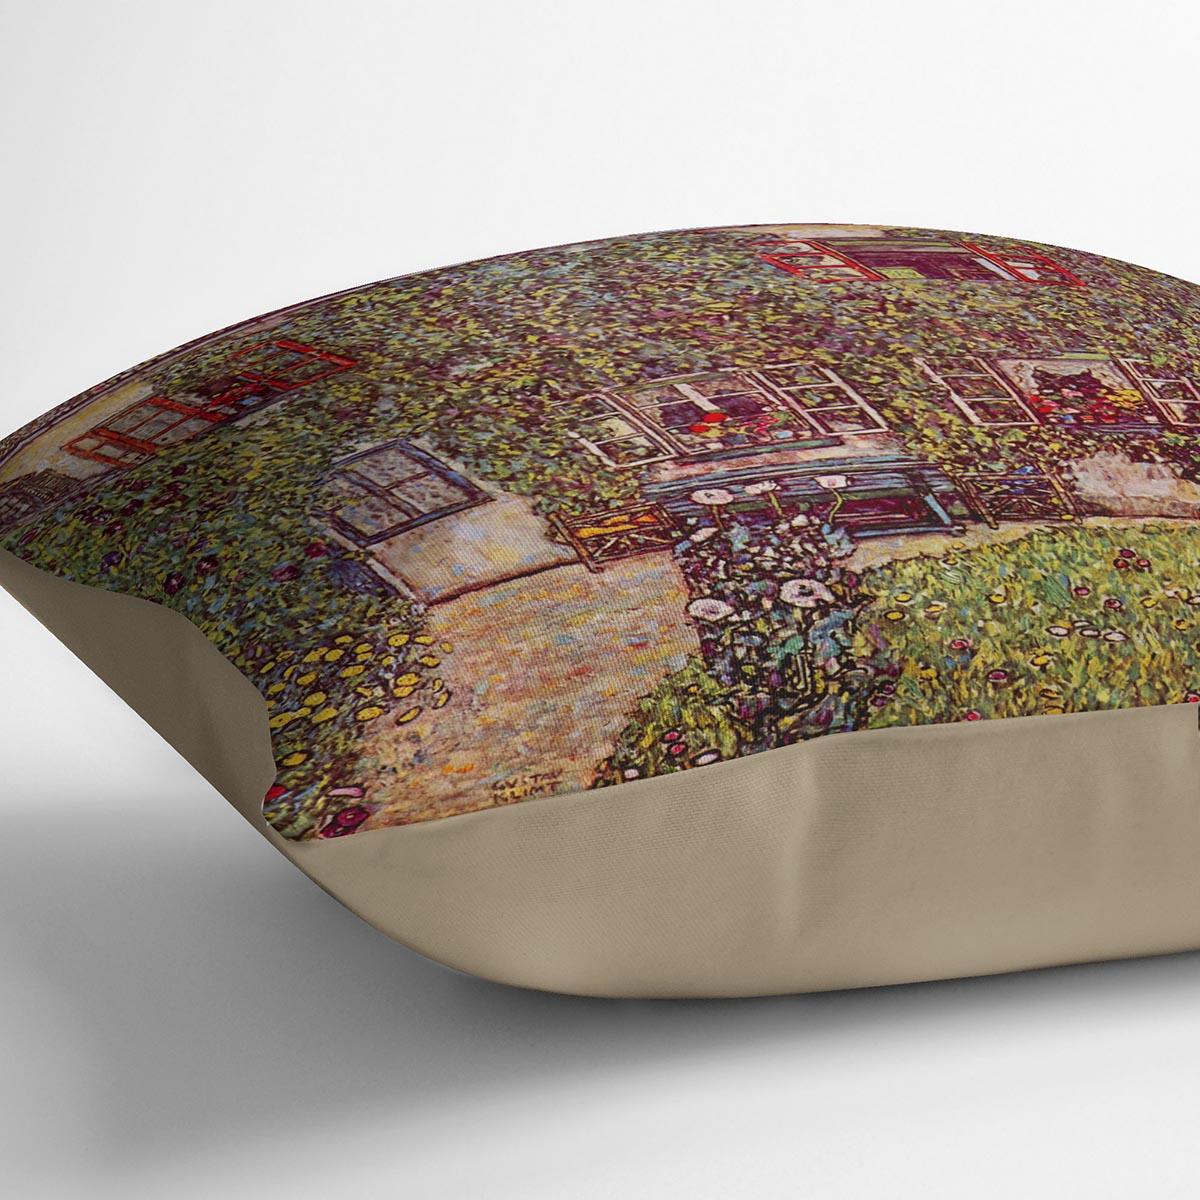 The House of Guard by Klimt Cushion